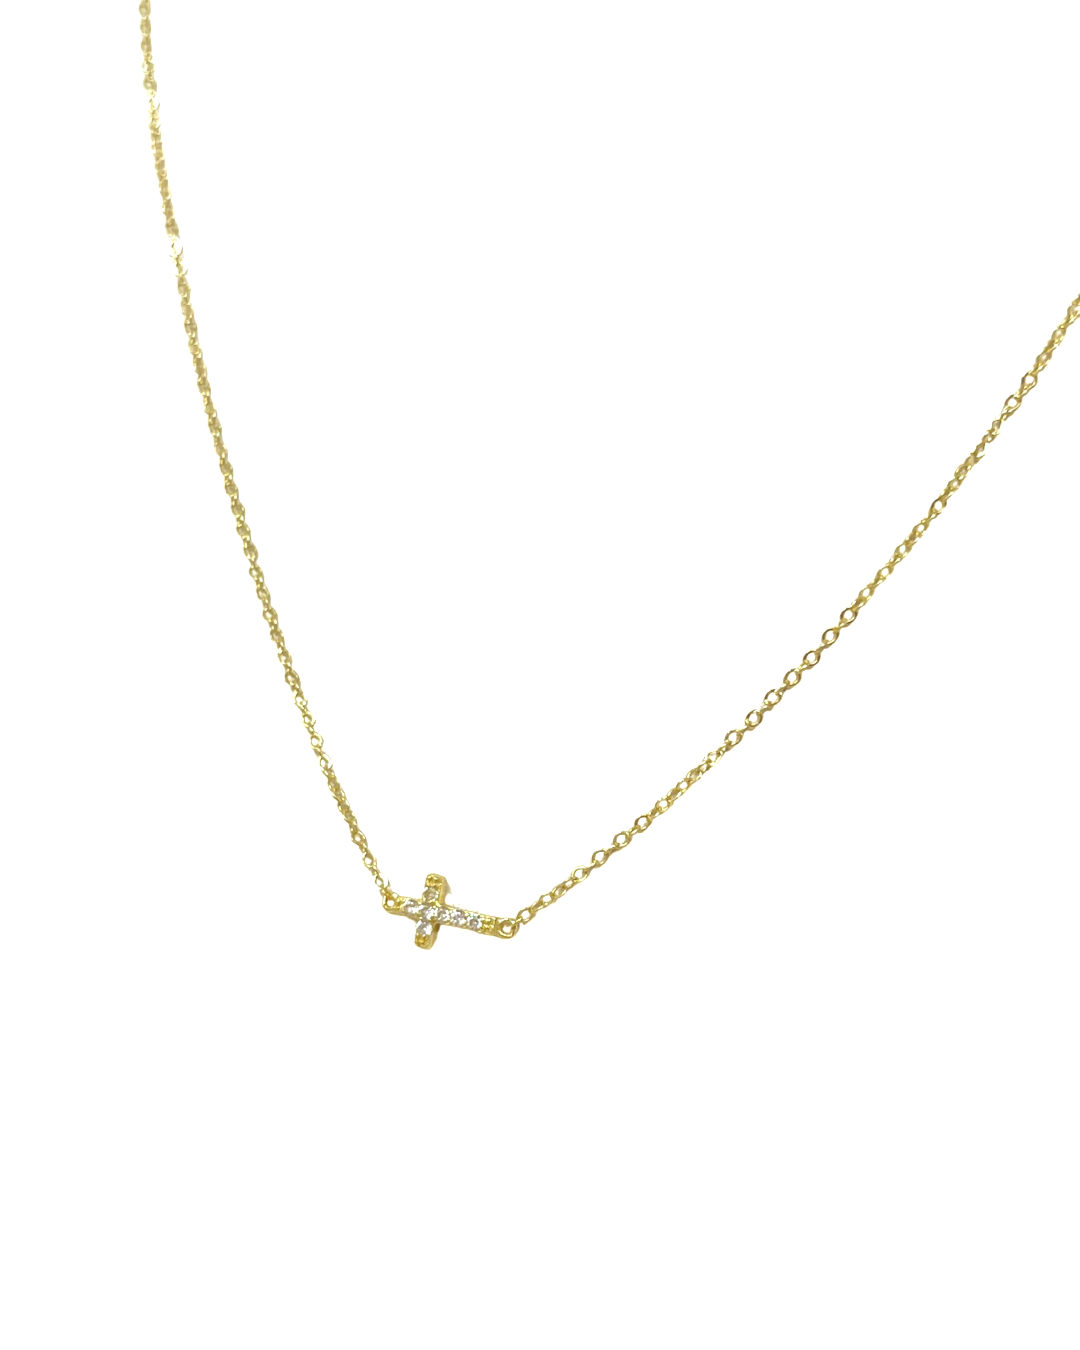 Pave Sideways Cross Necklace in Gold